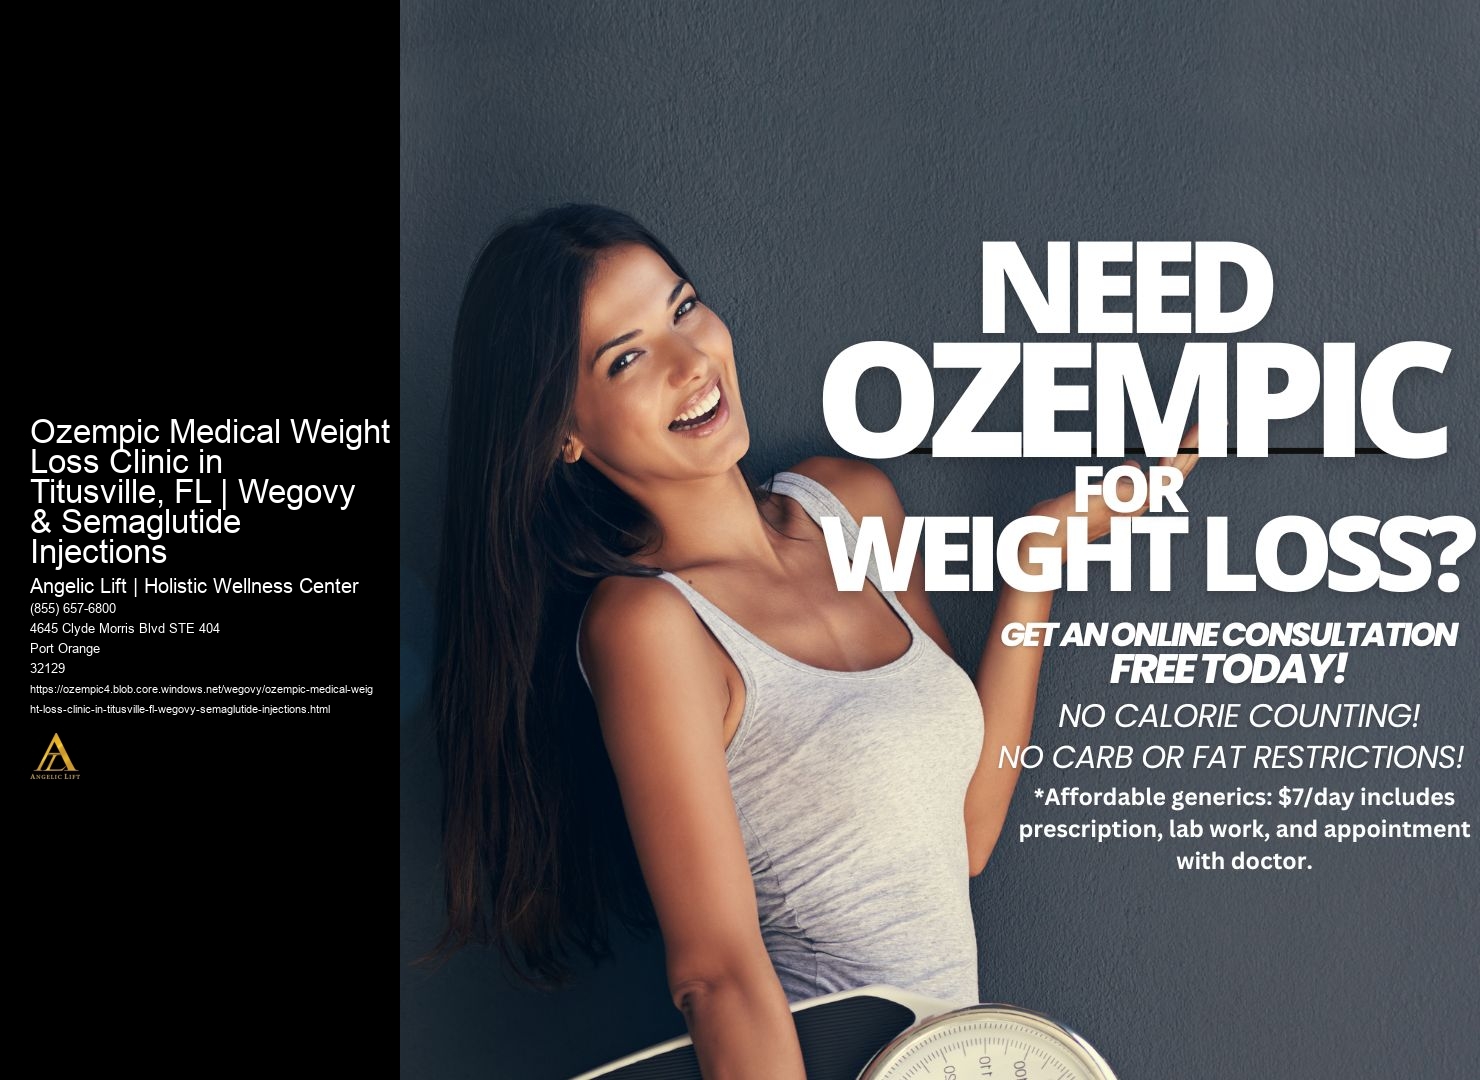 Ozempic Medical Weight Loss Clinic in Titusville, FL | Wegovy & Semaglutide Injections